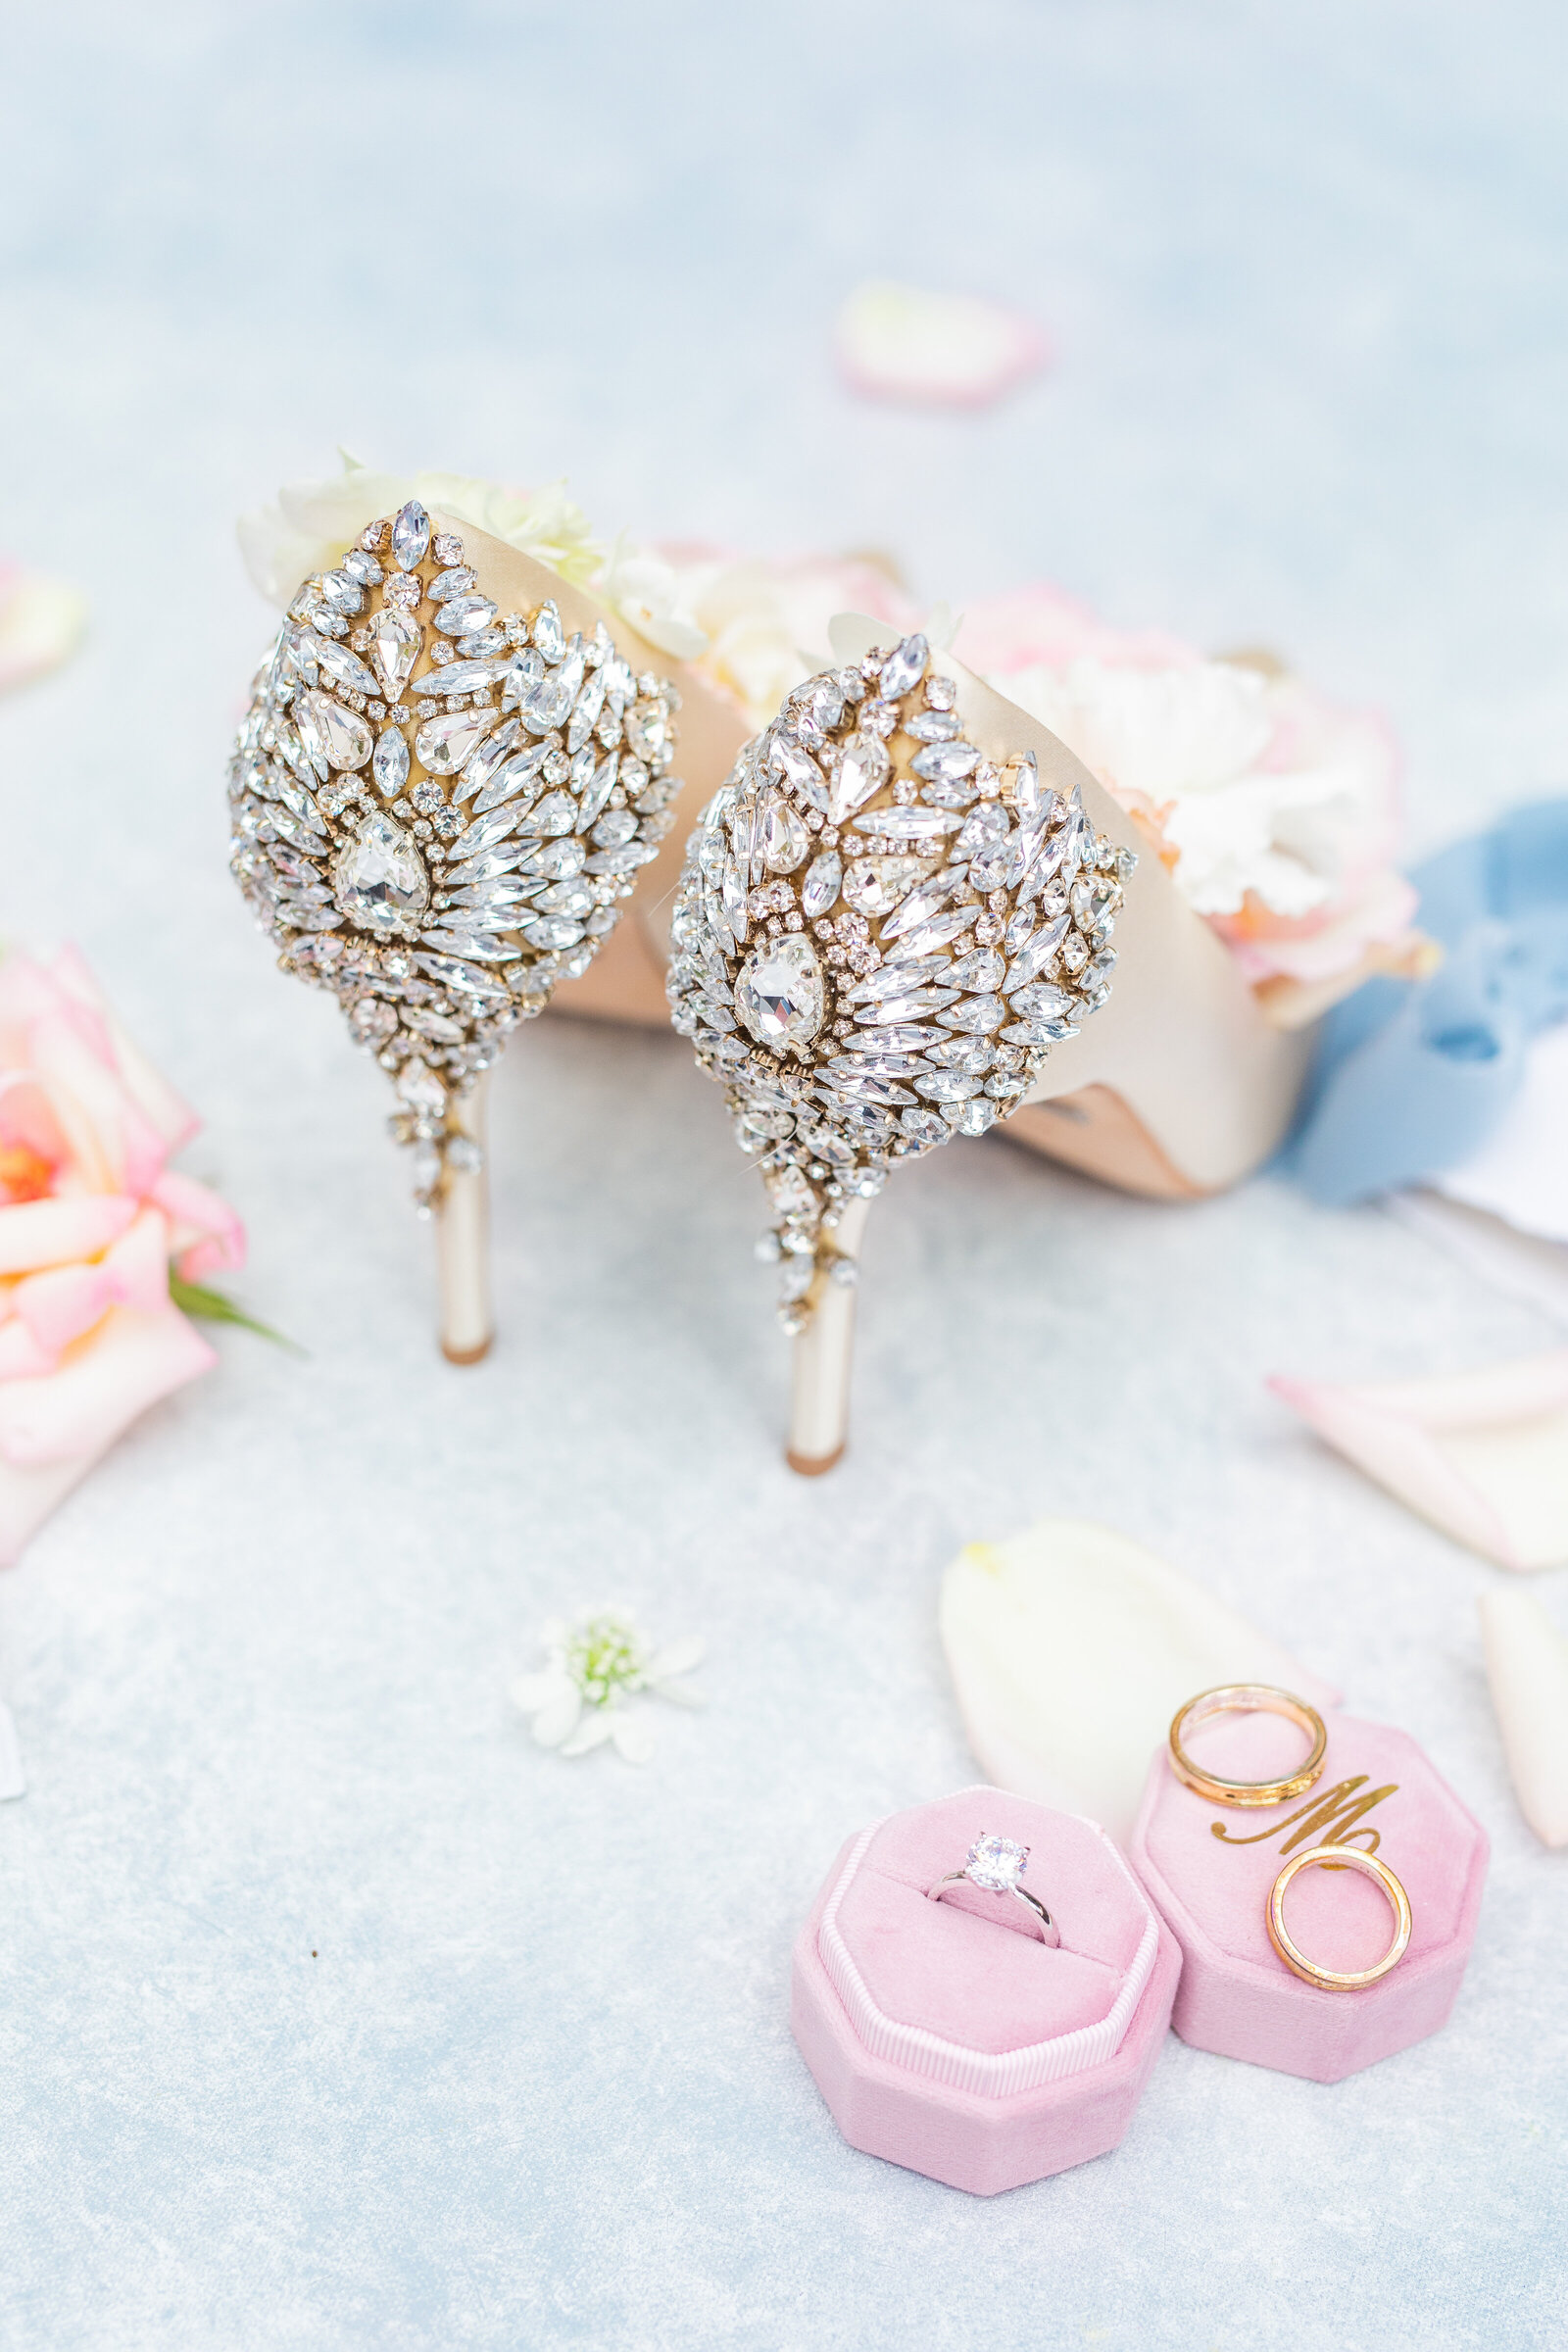 Luxury crystal shoes for the bride in Laguna Beach.